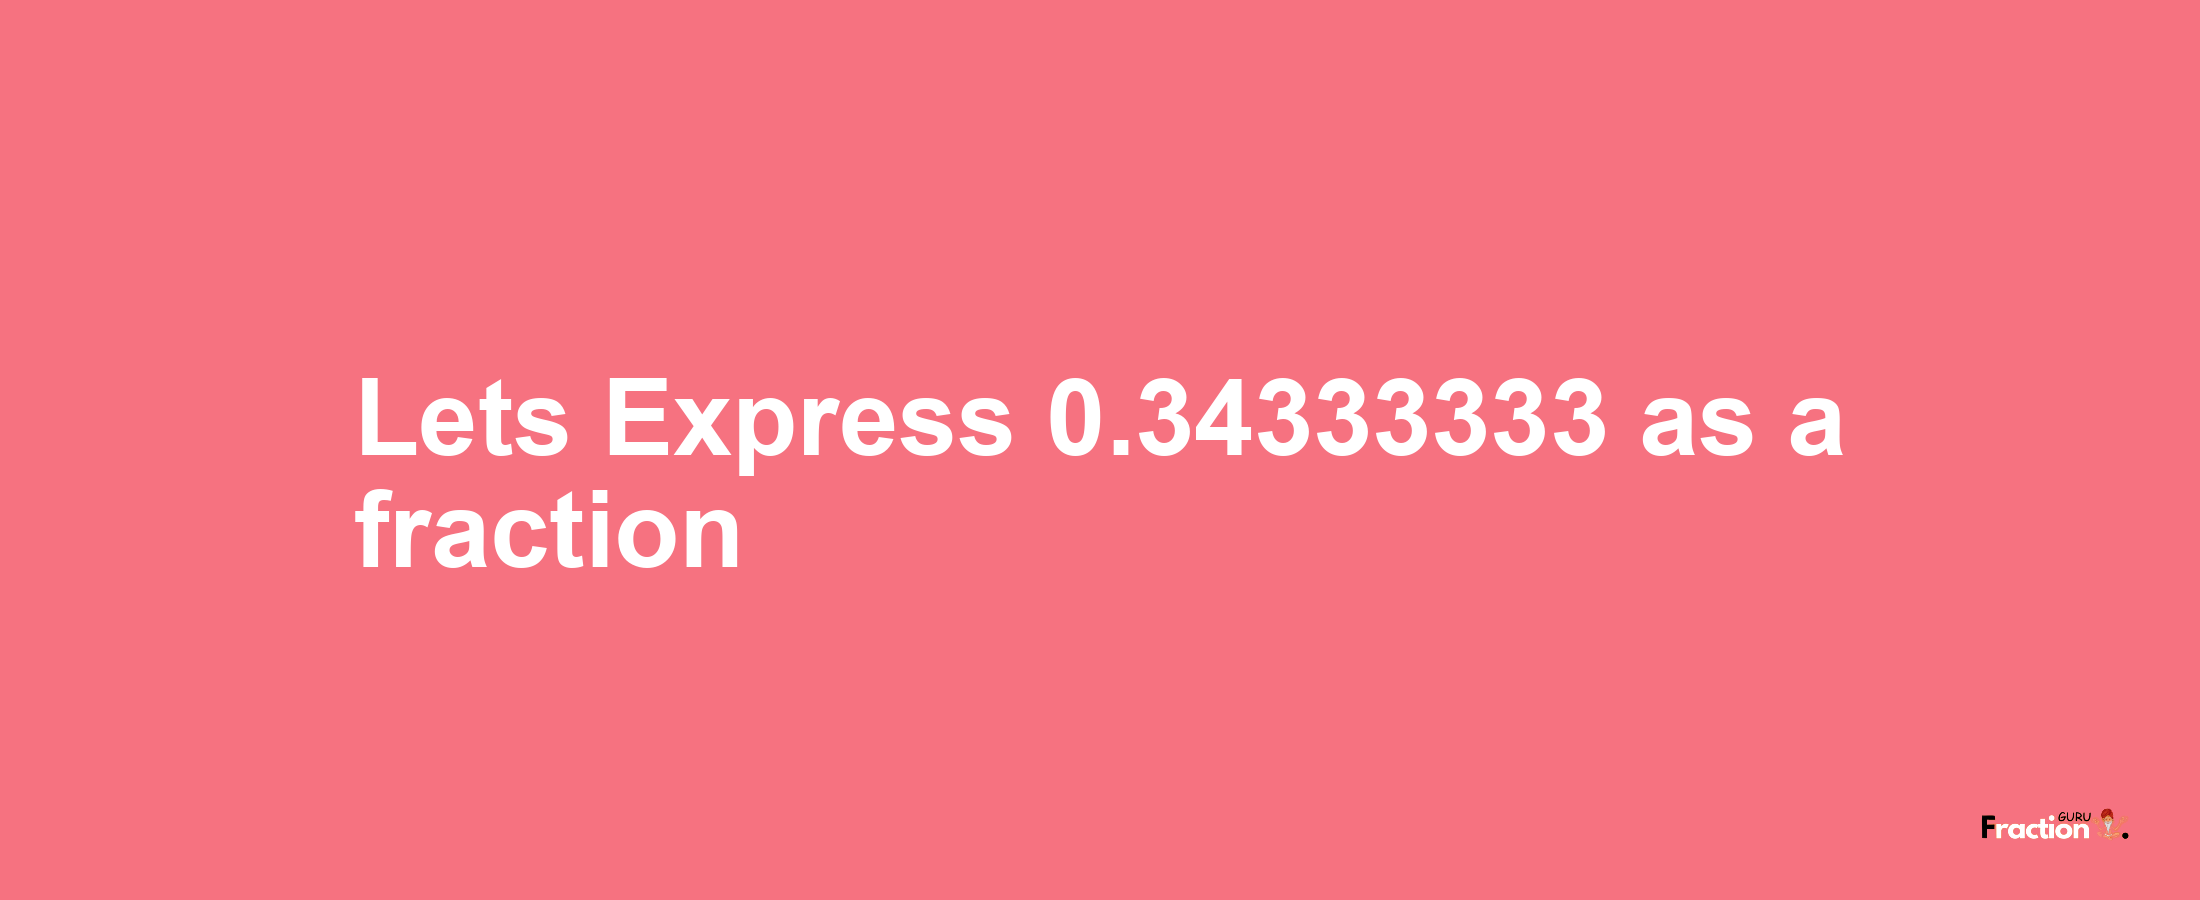 Lets Express 0.34333333 as afraction